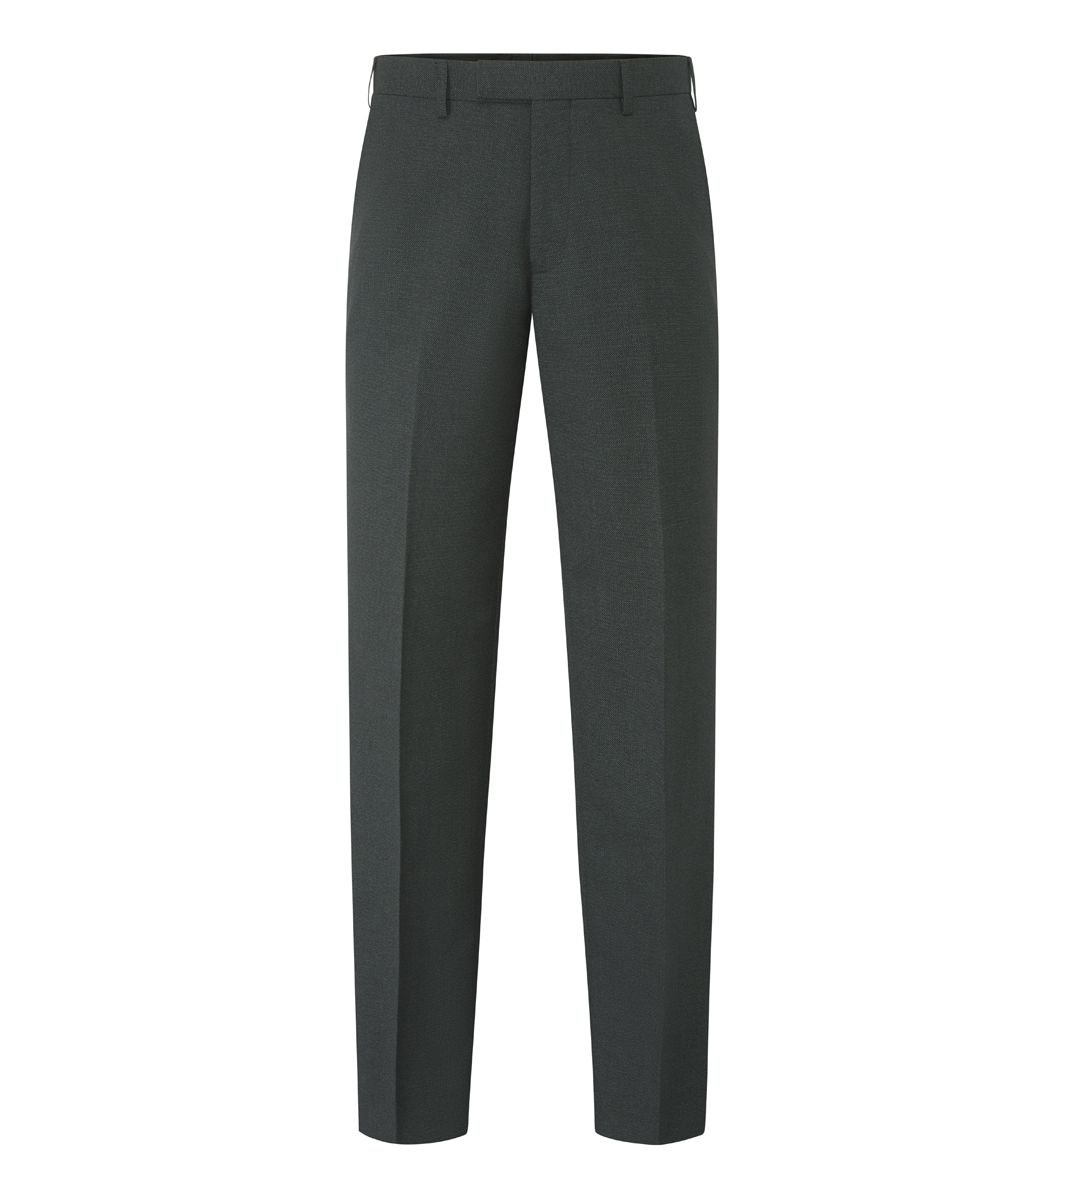 Skopes Green Harcourt Suit Trousers Long Length